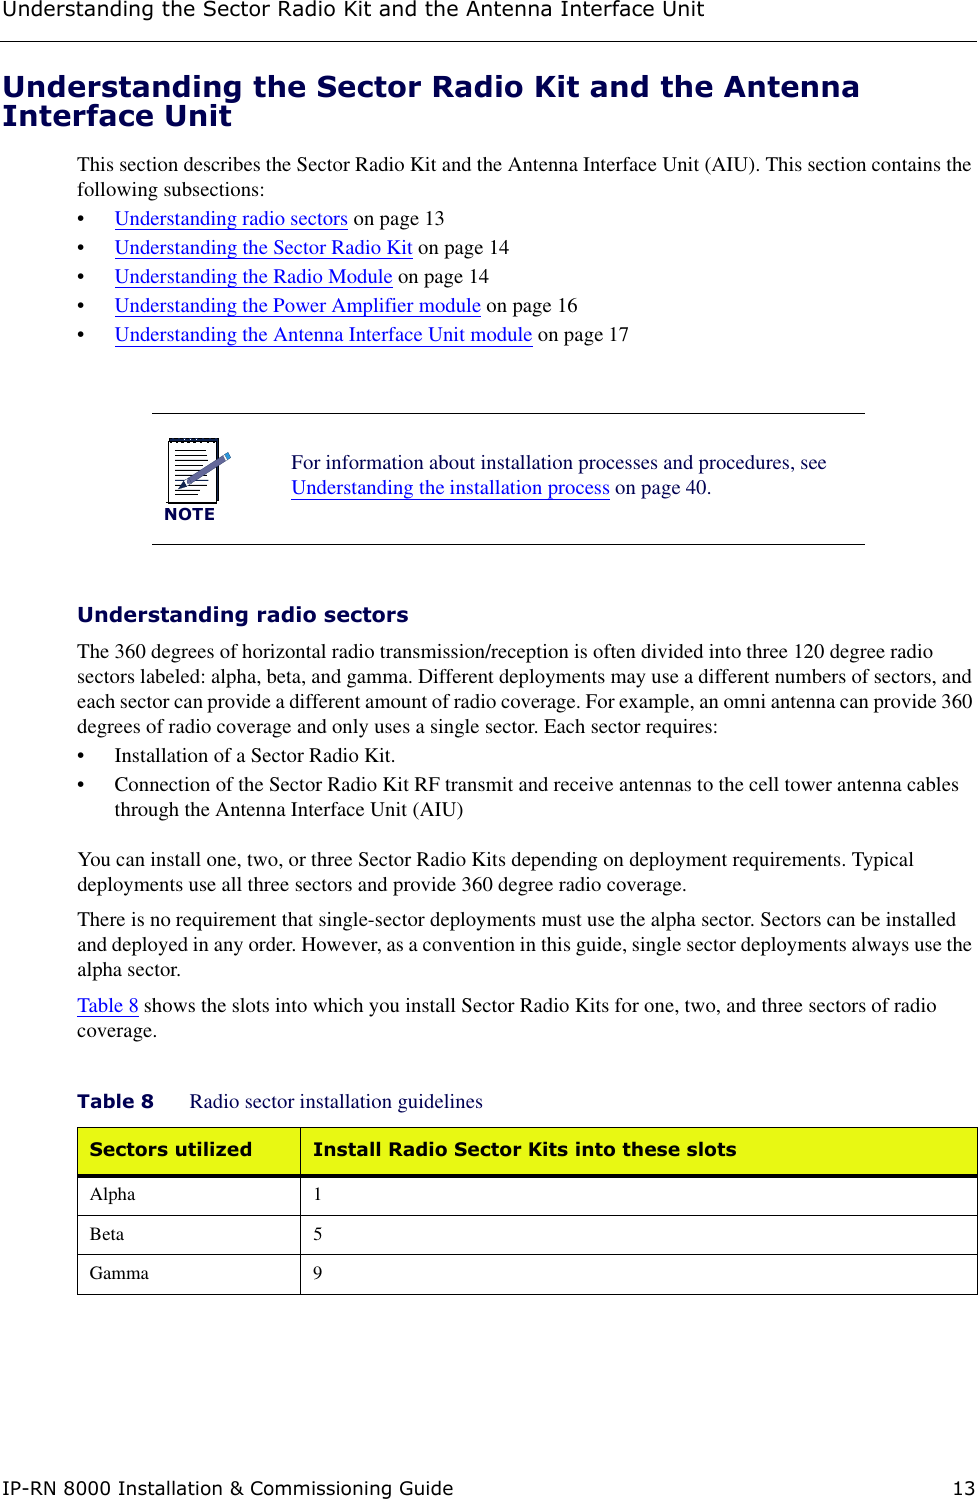 Understanding the Sector Radio Kit and the Antenna Interface UnitIP-RN 8000 Installation &amp; Commissioning Guide 13Understanding the Sector Radio Kit and the Antenna Interface UnitThis section describes the Sector Radio Kit and the Antenna Interface Unit (AIU). This section contains the following subsections:•Understanding radio sectors on page 13•Understanding the Sector Radio Kit on page 14•Understanding the Radio Module on page 14•Understanding the Power Amplifier module on page 16•Understanding the Antenna Interface Unit module on page 17Understanding radio sectorsThe 360 degrees of horizontal radio transmission/reception is often divided into three 120 degree radio sectors labeled: alpha, beta, and gamma. Different deployments may use a different numbers of sectors, and each sector can provide a different amount of radio coverage. For example, an omni antenna can provide 360 degrees of radio coverage and only uses a single sector. Each sector requires:• Installation of a Sector Radio Kit.• Connection of the Sector Radio Kit RF transmit and receive antennas to the cell tower antenna cables through the Antenna Interface Unit (AIU)You can install one, two, or three Sector Radio Kits depending on deployment requirements. Typical deployments use all three sectors and provide 360 degree radio coverage. There is no requirement that single-sector deployments must use the alpha sector. Sectors can be installed and deployed in any order. However, as a convention in this guide, single sector deployments always use the alpha sector.Table 8 shows the slots into which you install Sector Radio Kits for one, two, and three sectors of radio coverage.NOTEFor information about installation processes and procedures, see Understanding the installation process on page 40.Table 8 Radio sector installation guidelinesSectors utilized Install Radio Sector Kits into these slotsAlpha 1Beta 5Gamma 9